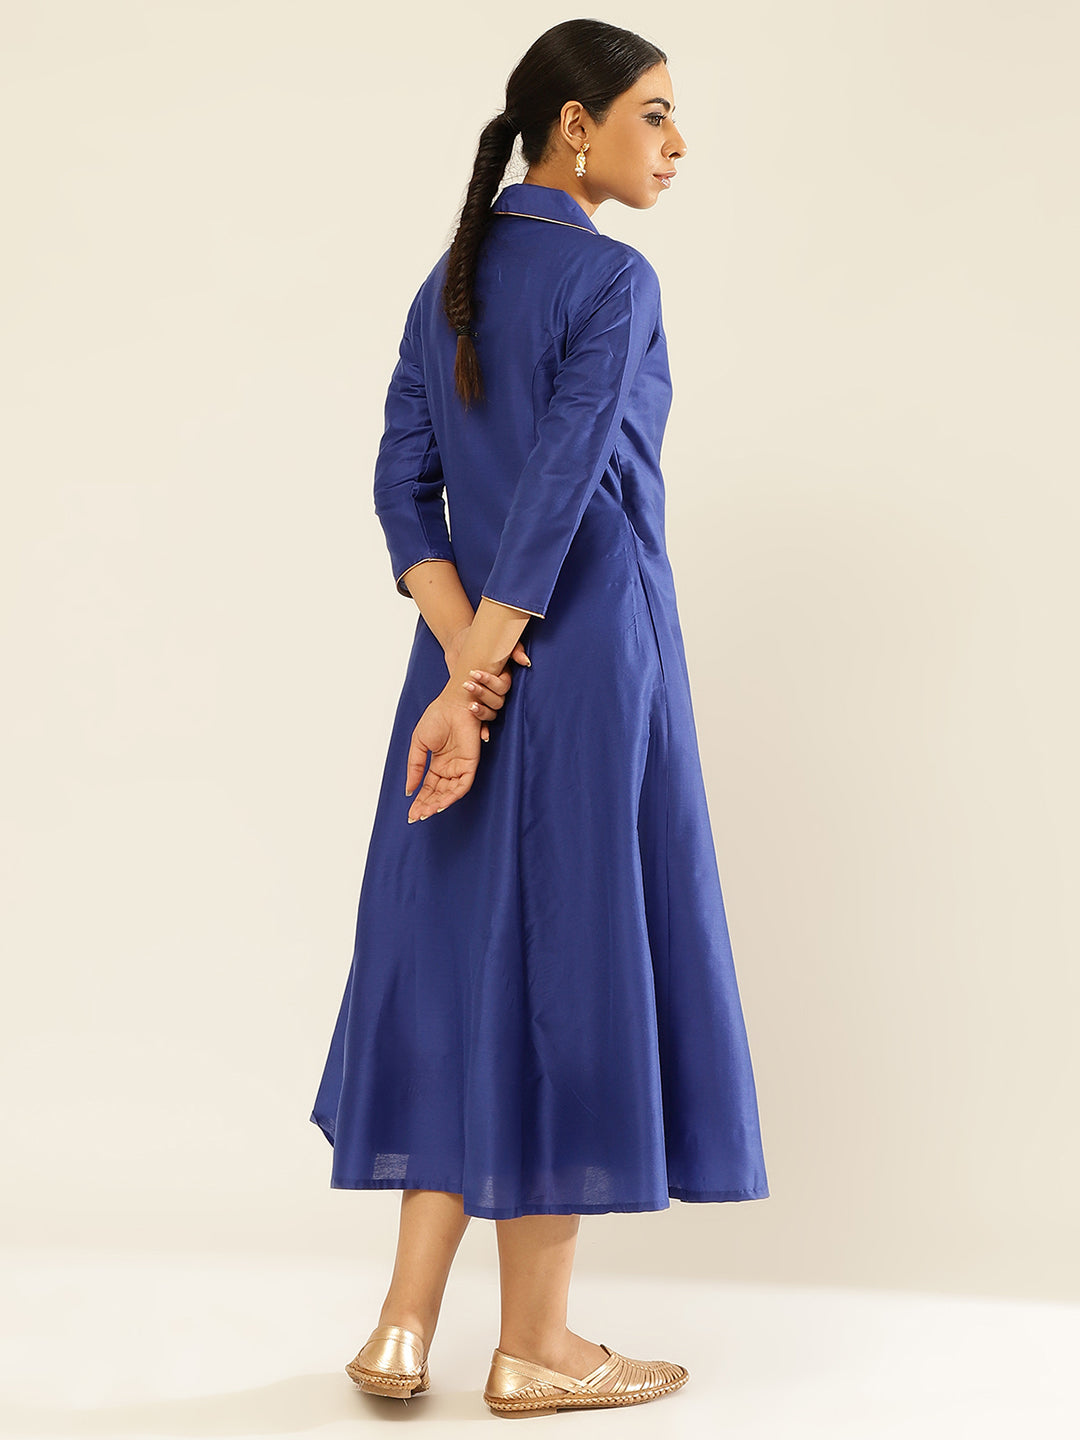 Lapel Collared Wrap Dress-Imperial Blue